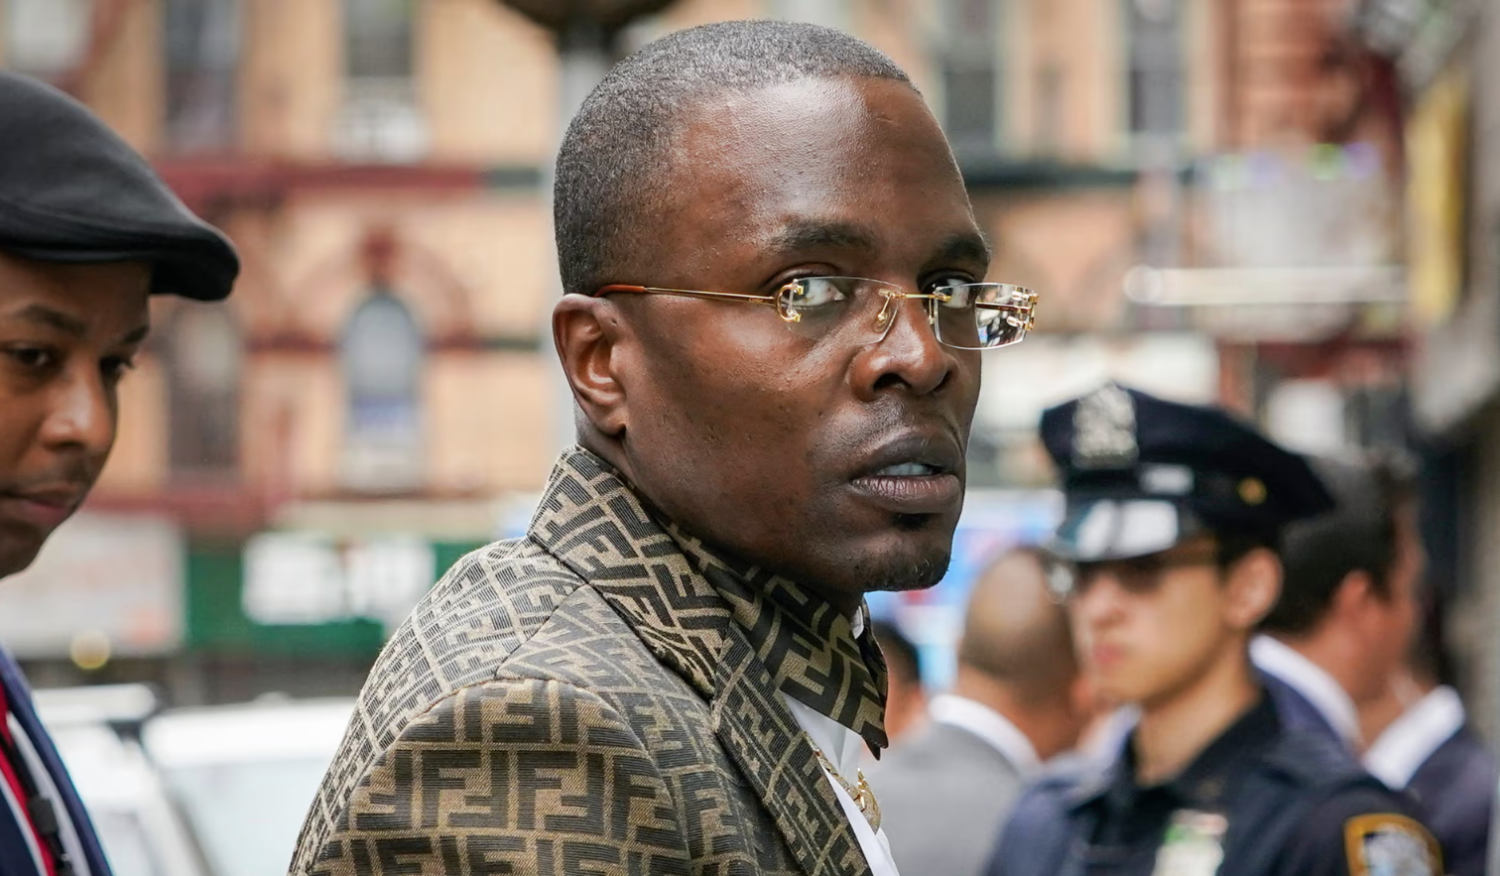 Brooklyn’s ‘bling bishop’ found guilty of wire fraud, extortion and lying to FBI